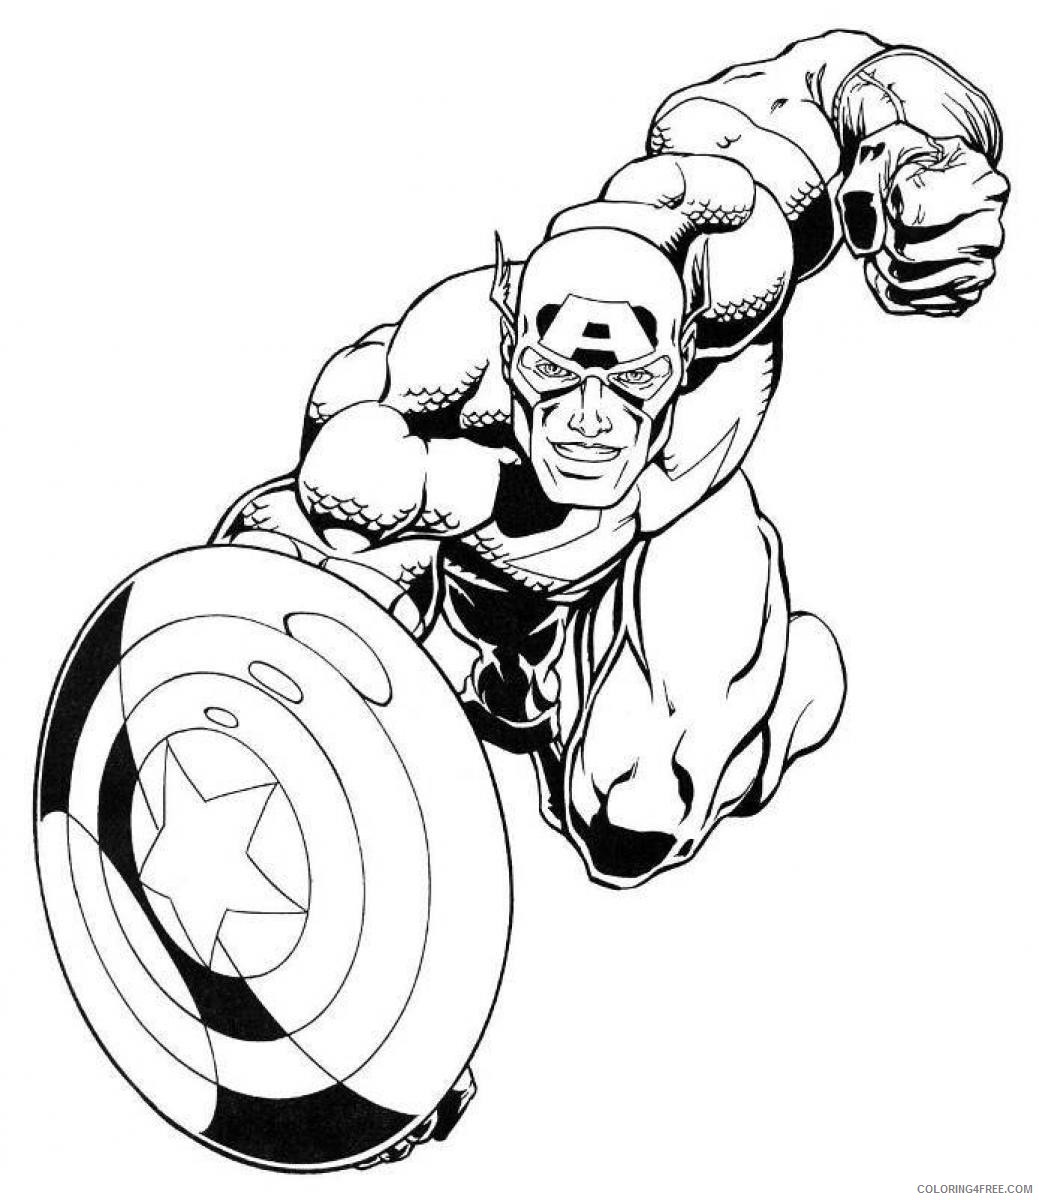 captain america coloring pages attacking enemy Coloring4free